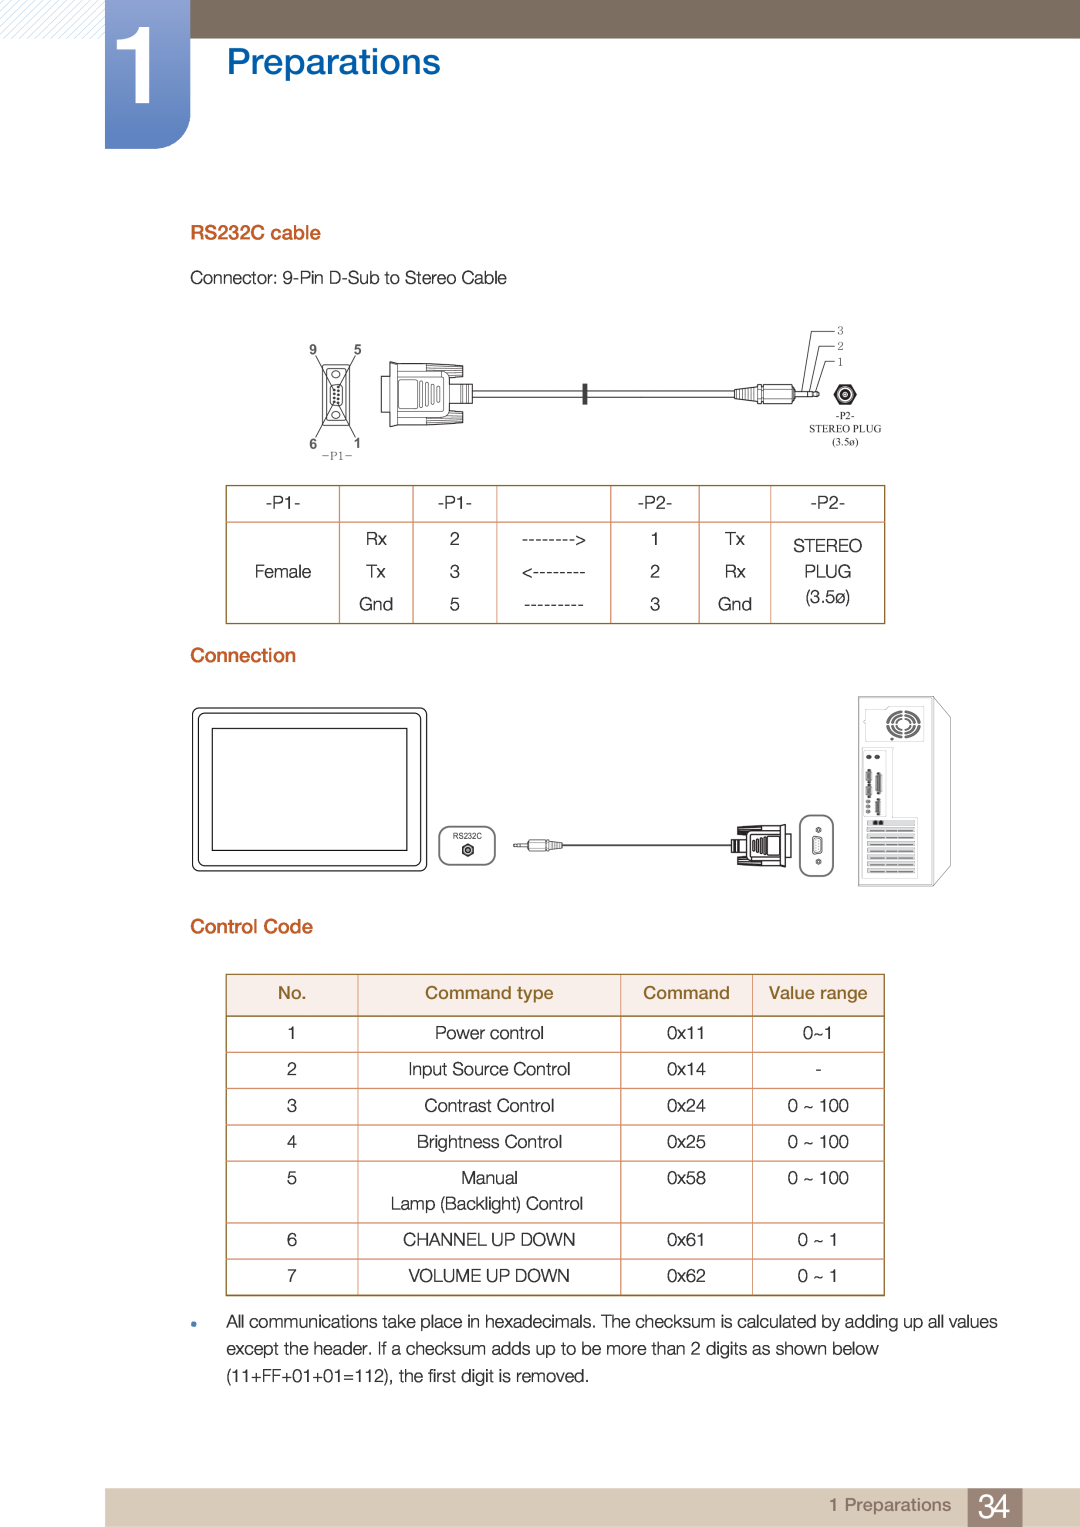 Samsung H46B, BN46-00281A-01, BN4600281A-01, H32B, H40B, 32IN user manual RS232C cable, Connection, Control Code, Preparations 